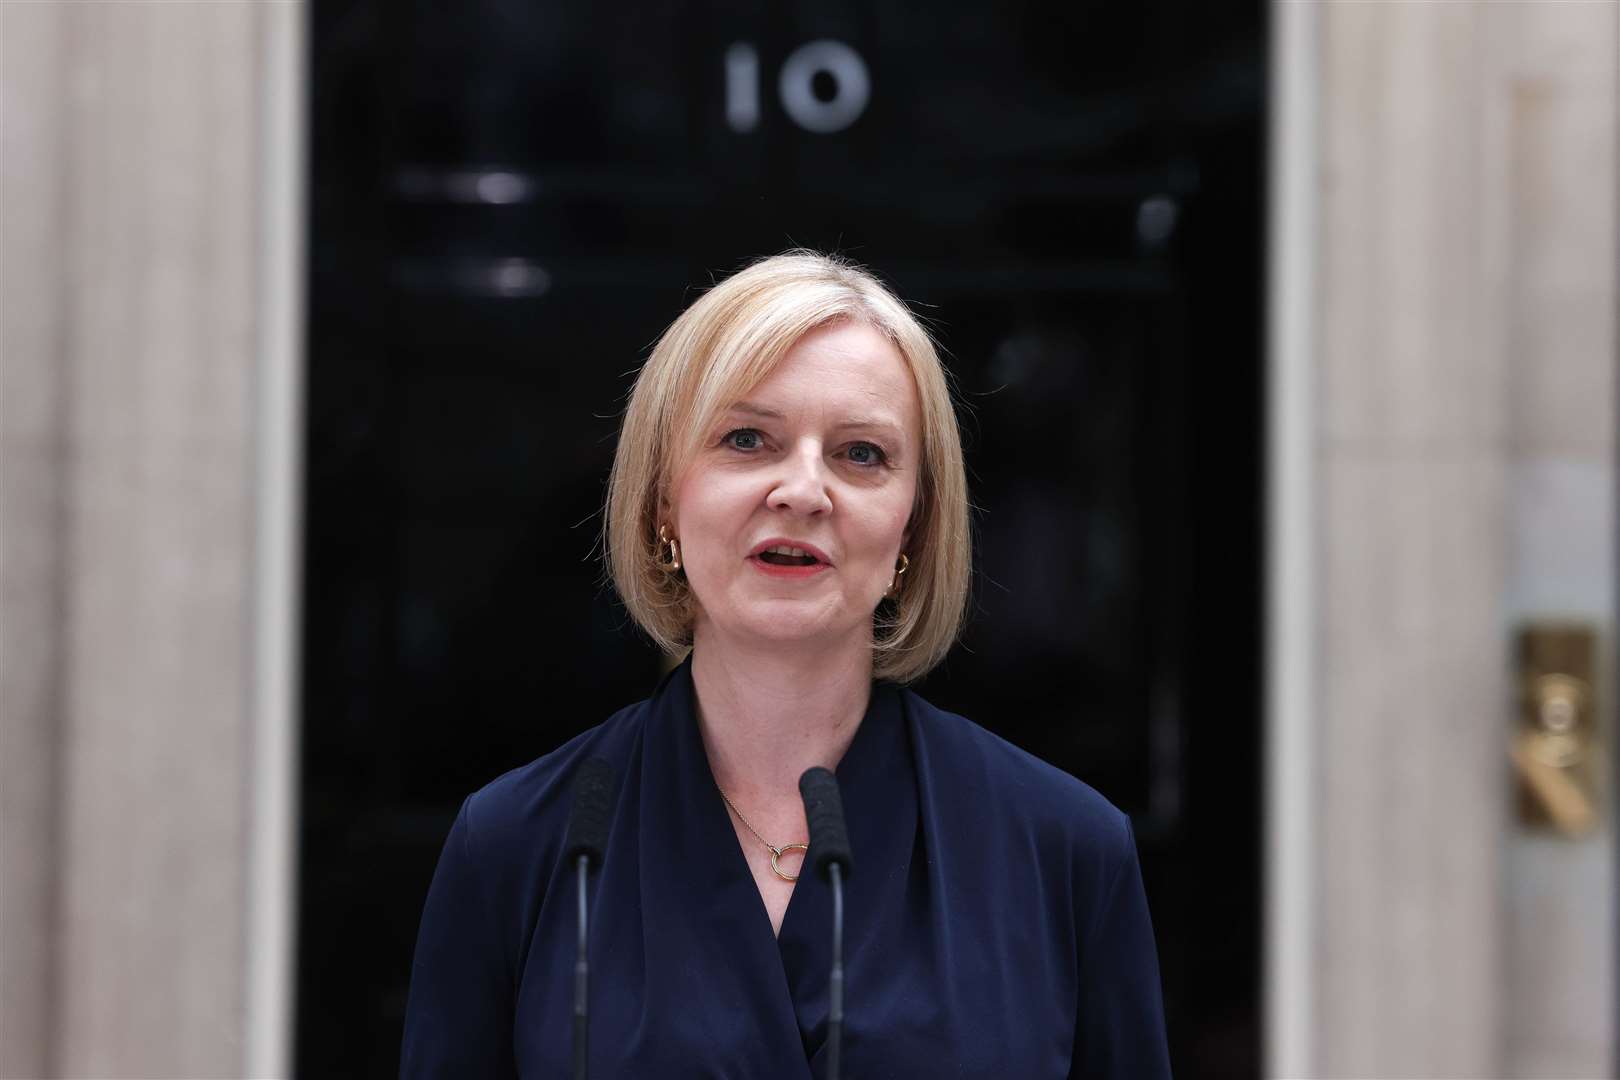 Liz Truss announced she is standing down after 45 days in Downing Street.